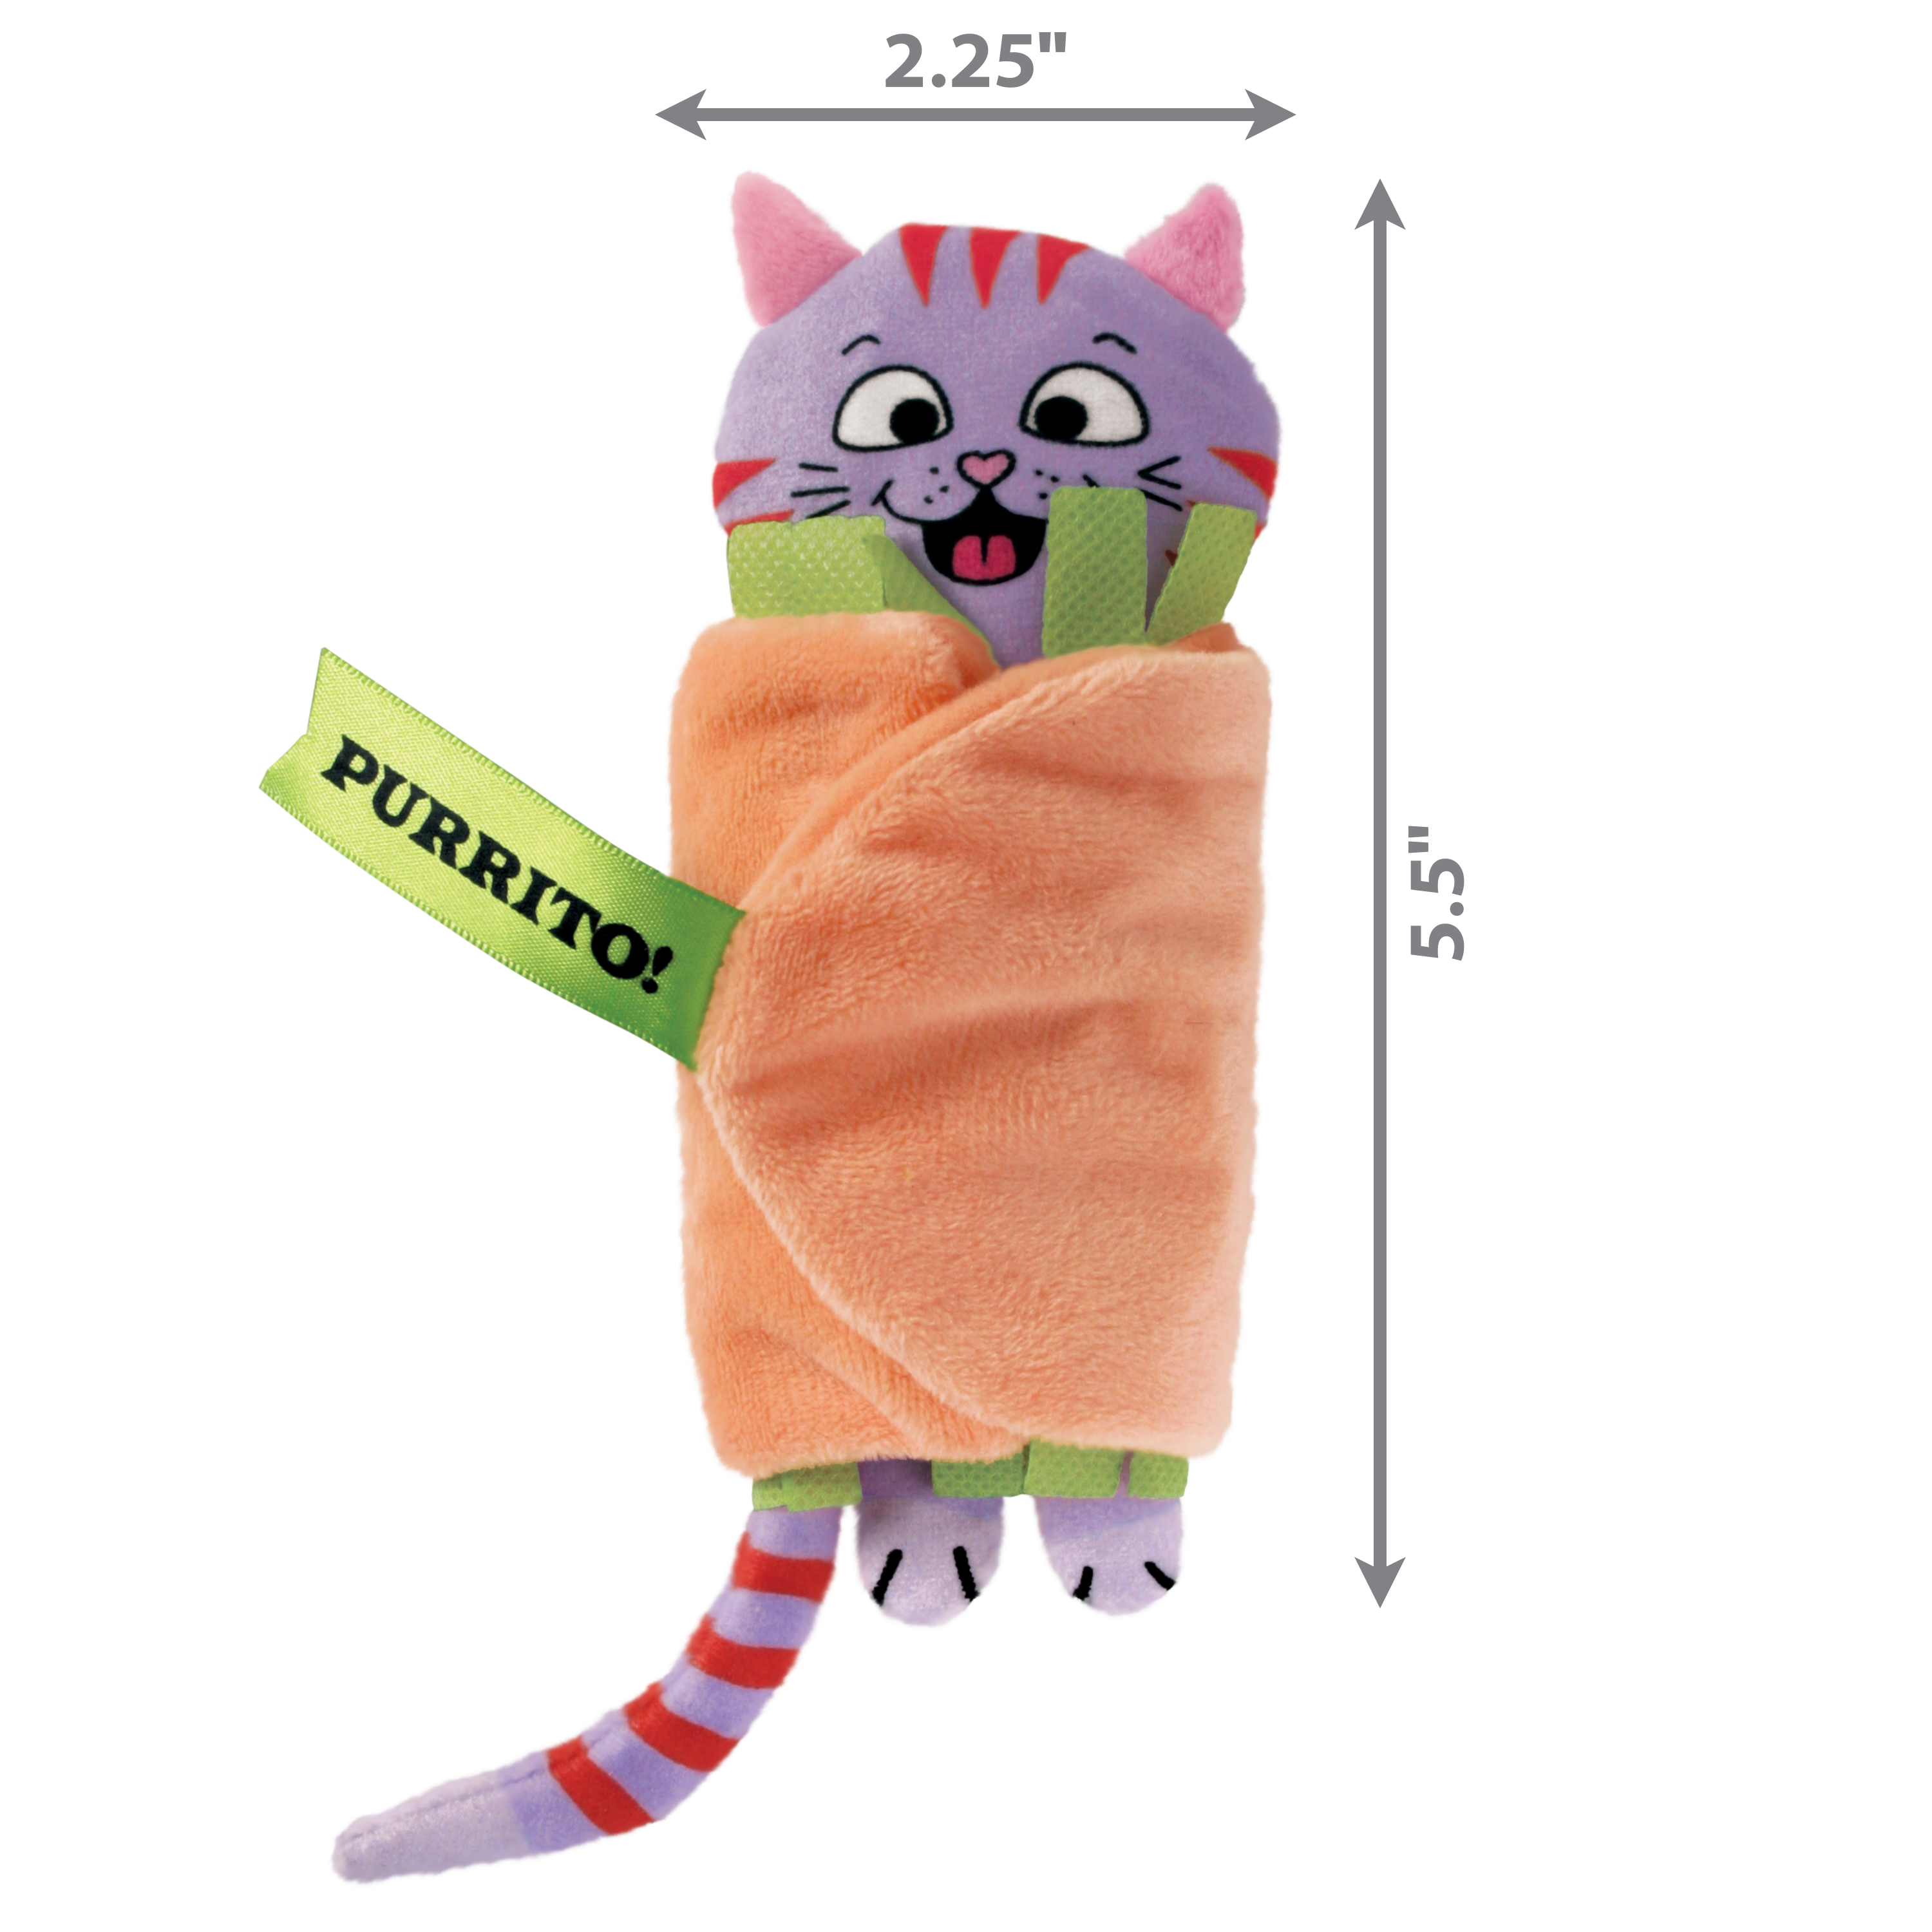 Pull-A-Partz Purrito dimoffpack product image